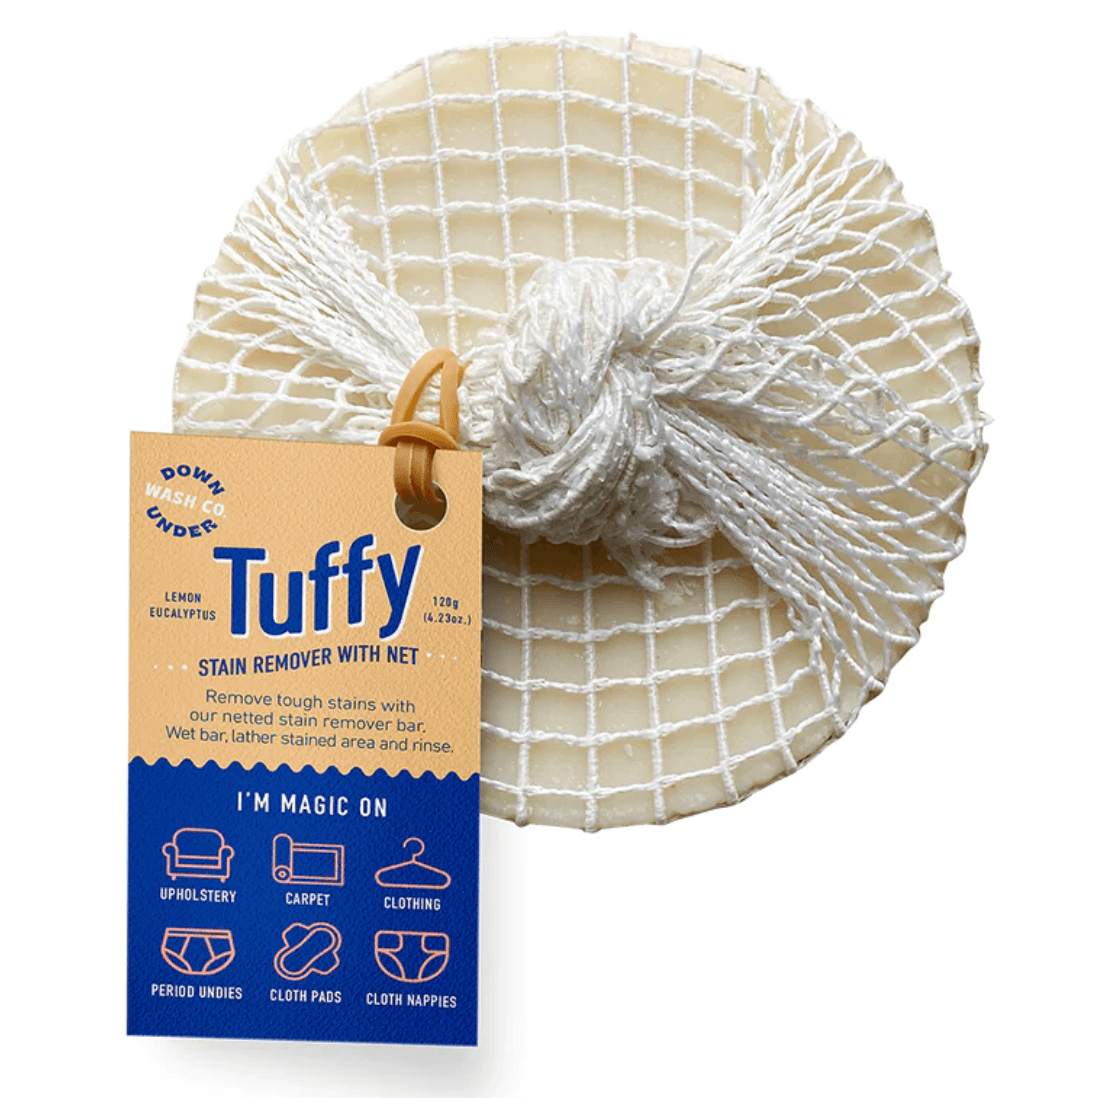 tuffy stain remover soap with net for laundry use